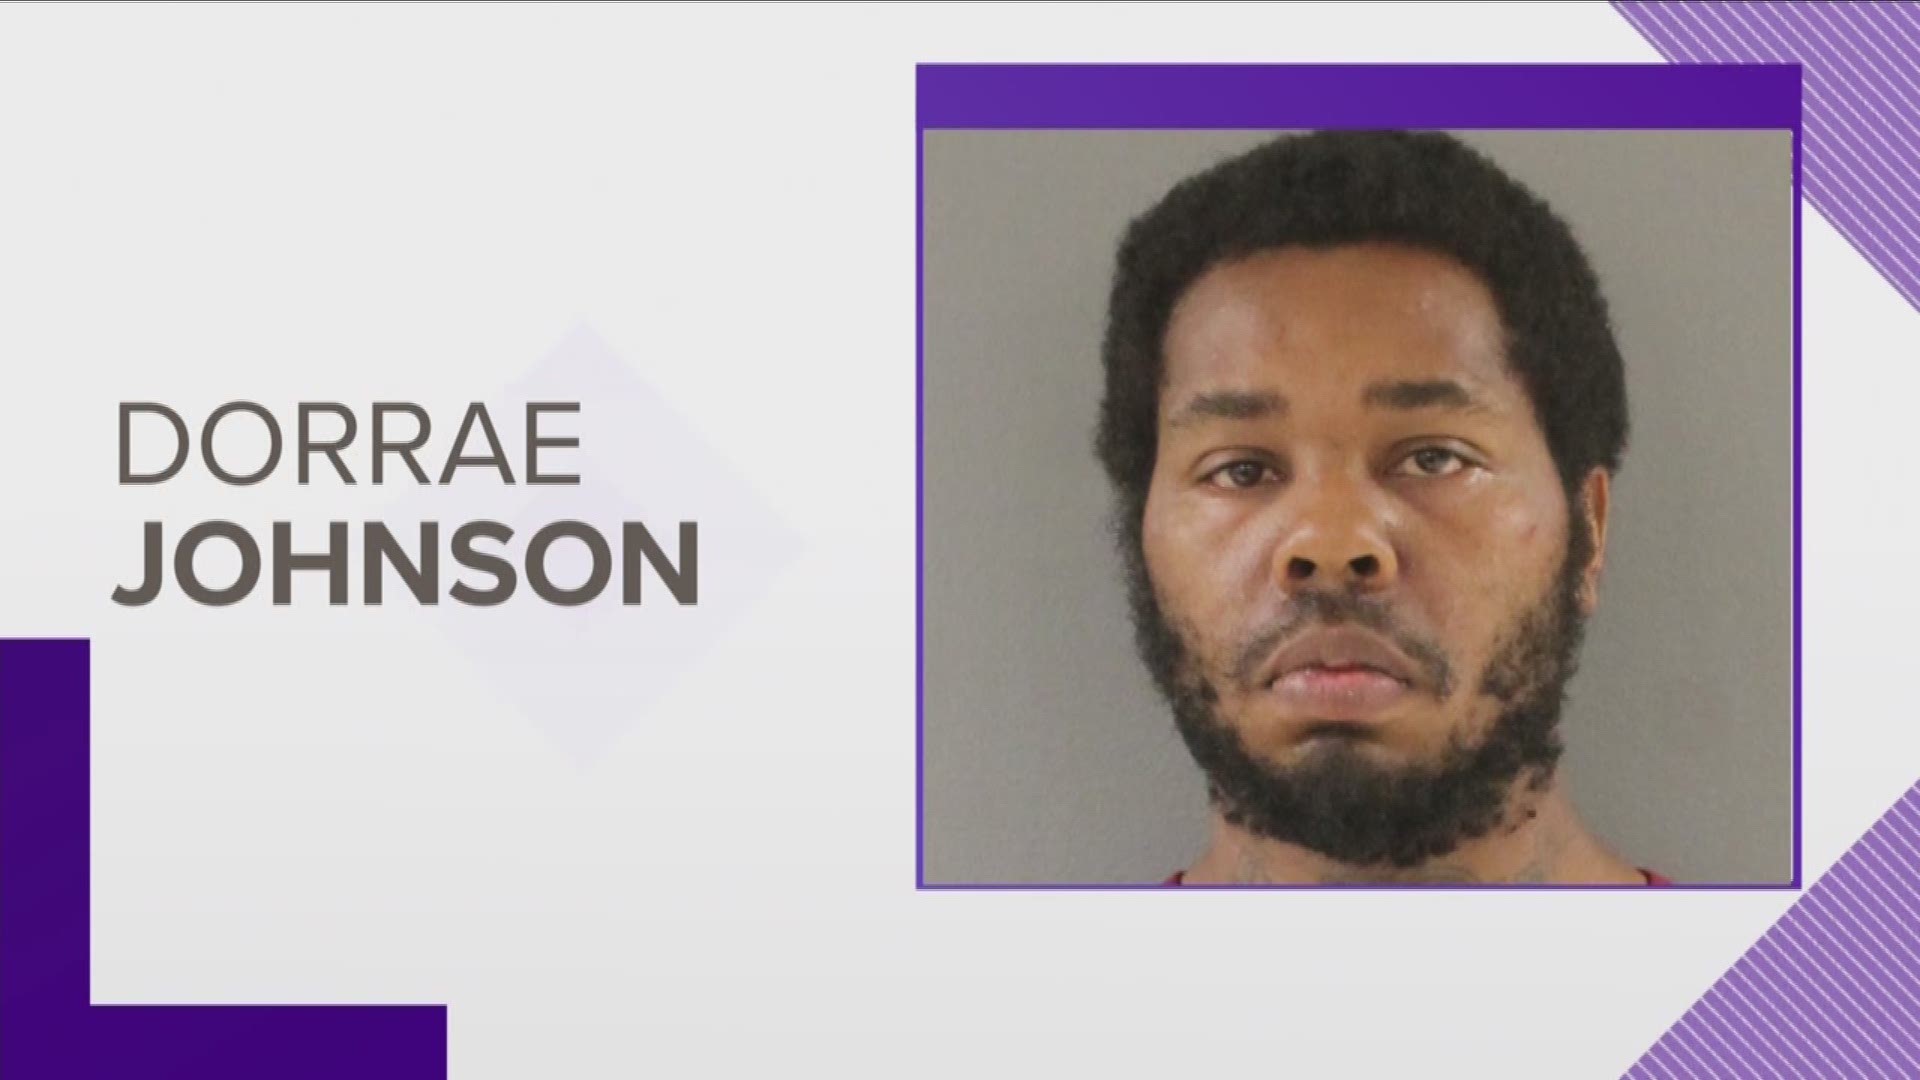 The state is seeking to revoke or substantially increase bond for a Knoxville man found with a severed torso in his car after a chase and crash.